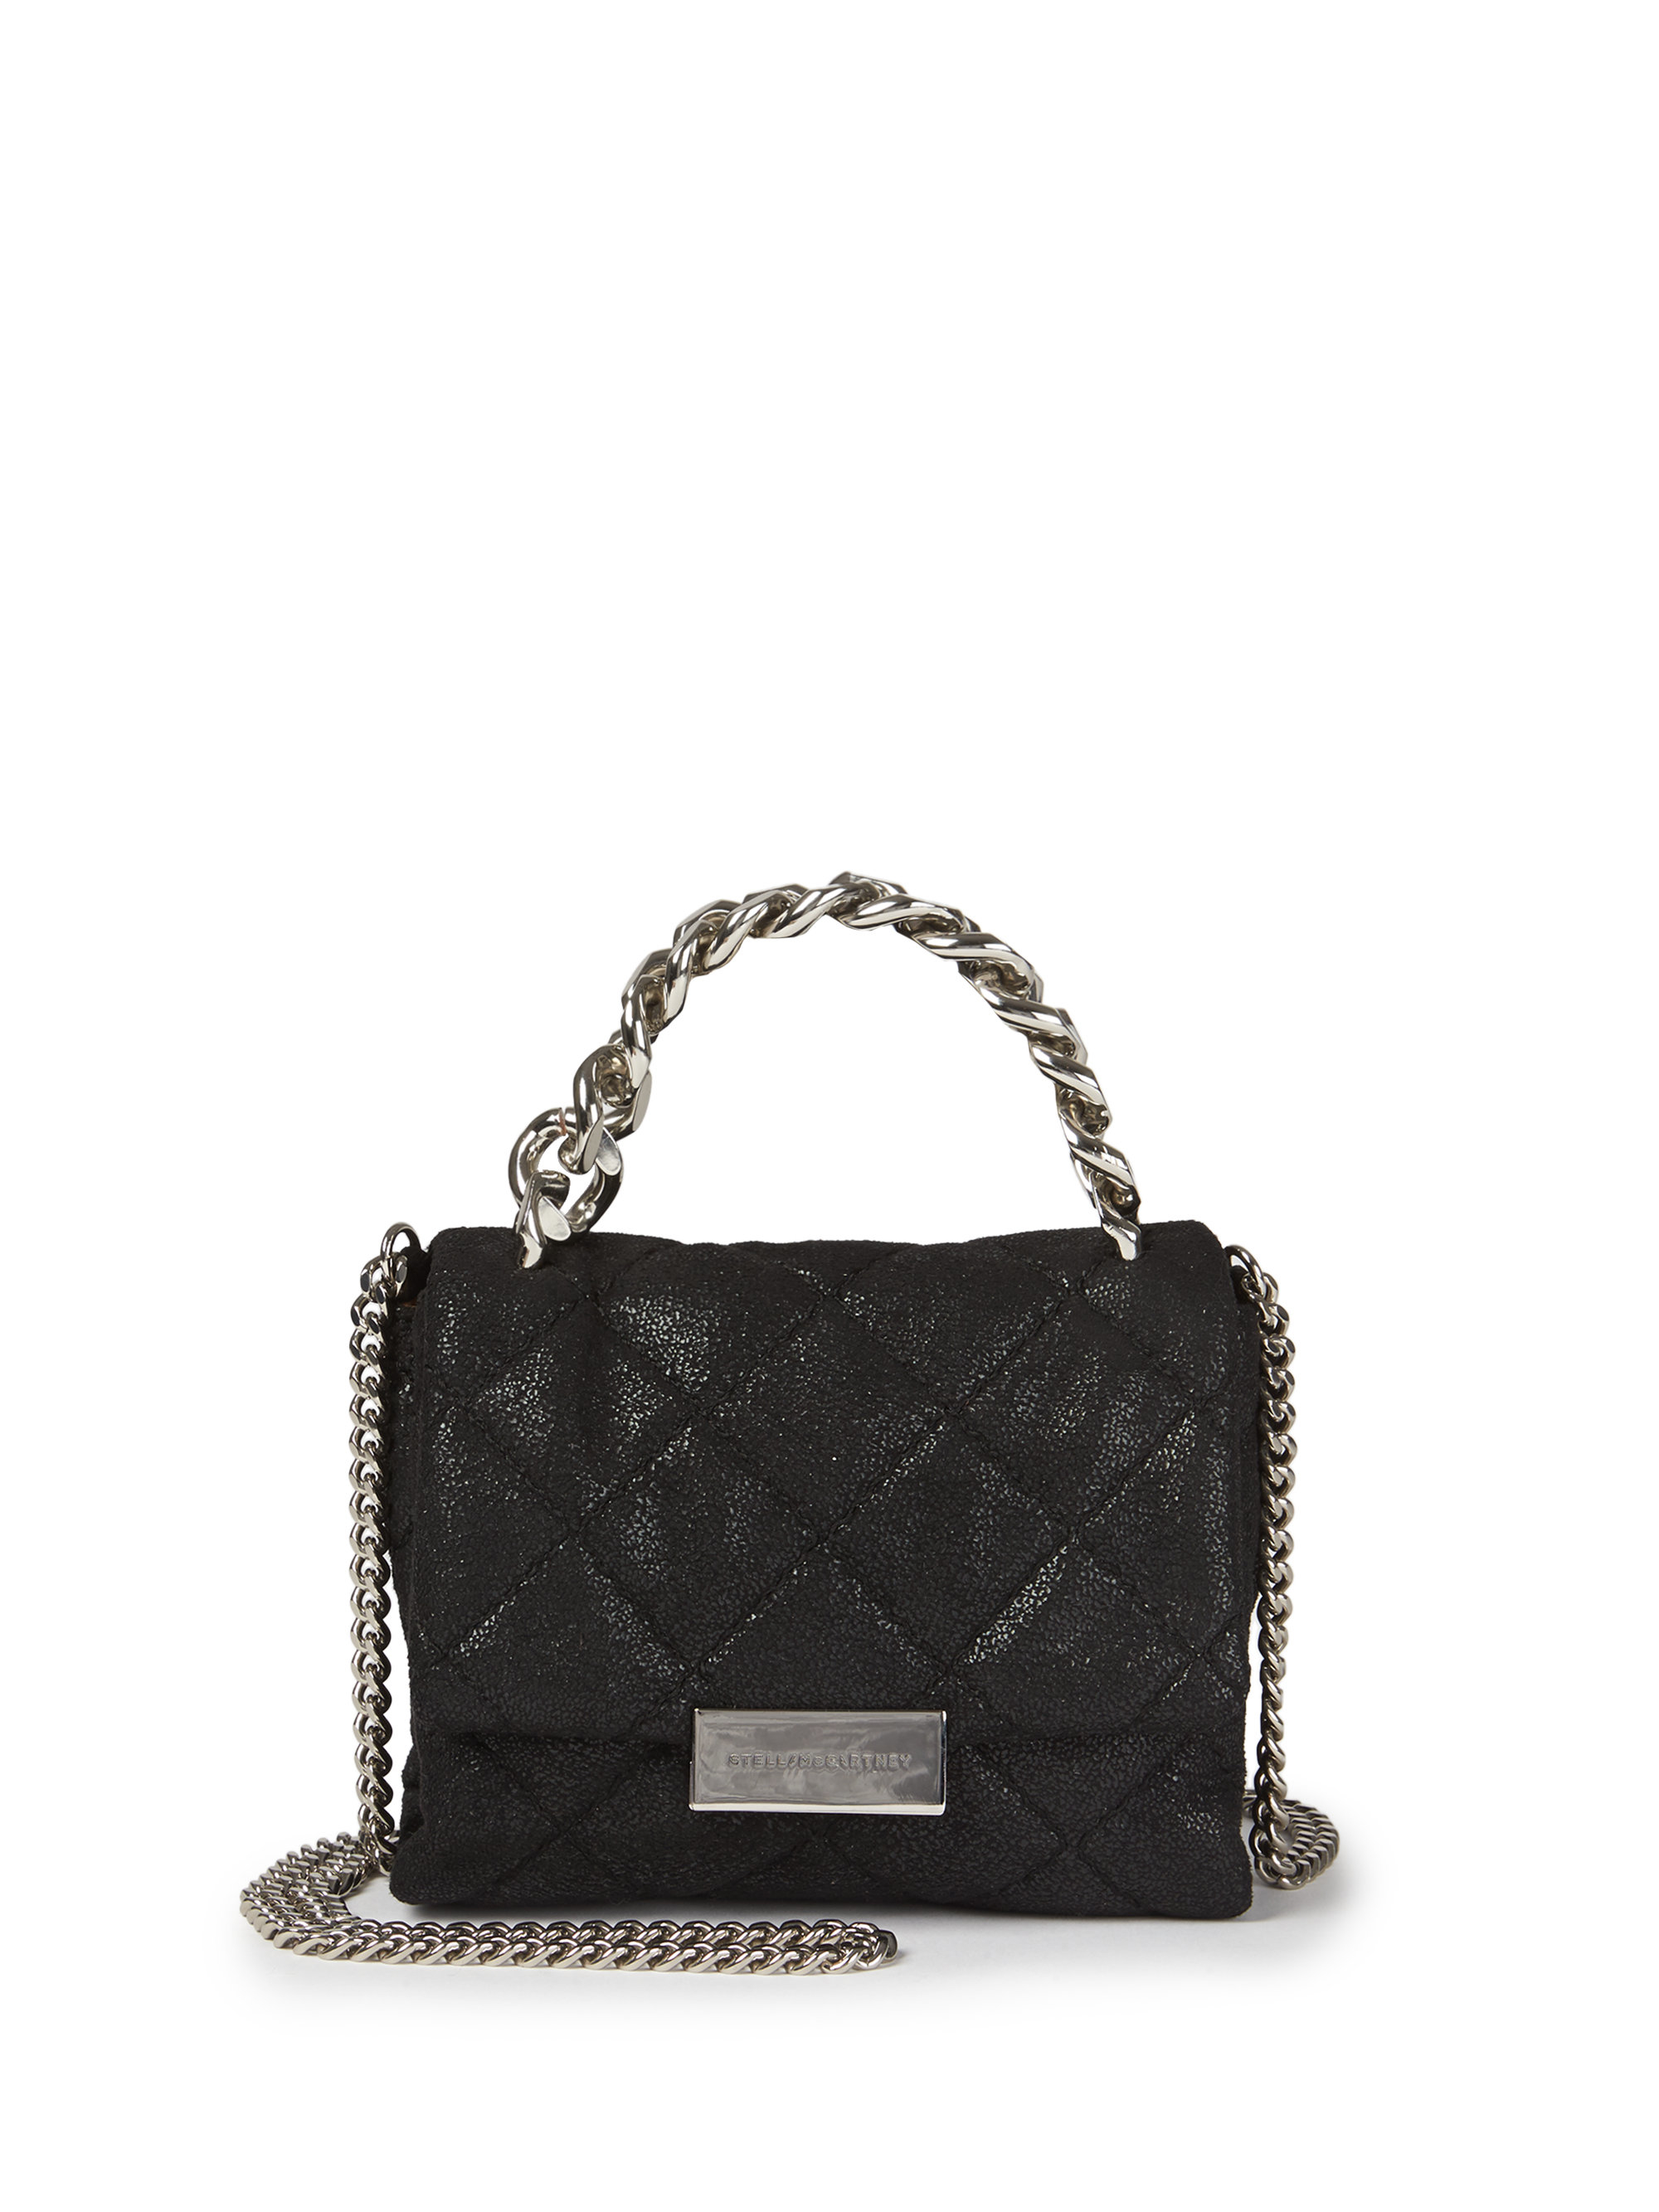 Stella McCartney Small Quilted Flap Faux Leather Shoulder Bag in Black - Lyst